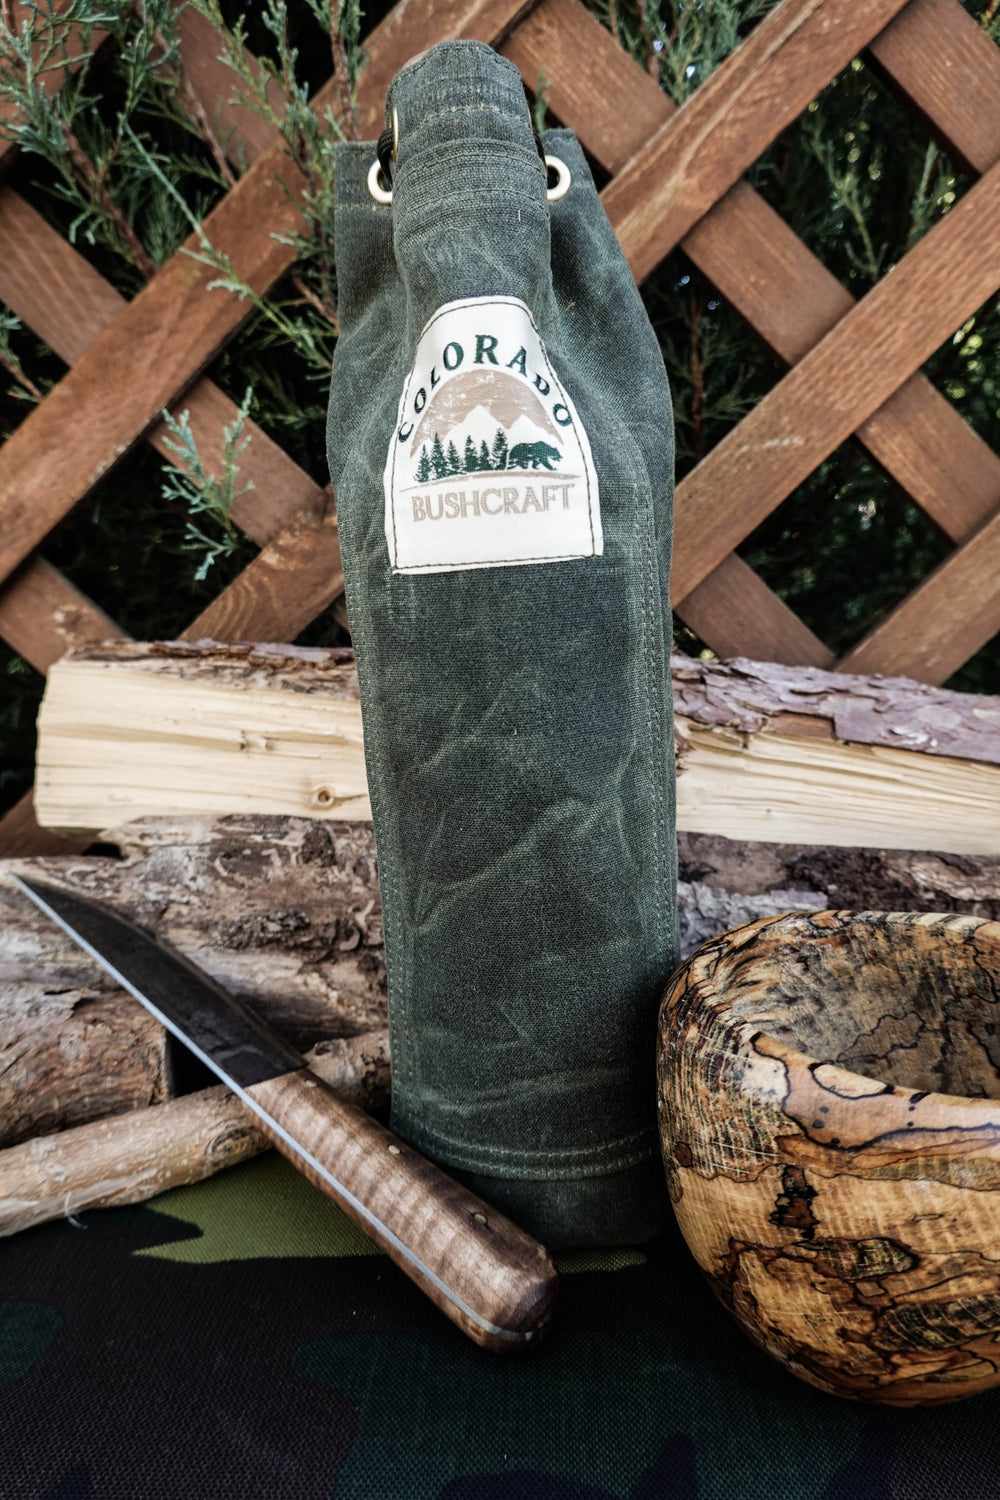 Handmade Waxed Canvas Wool Insulated Bushcraft Wine Bottle Carrier Coozie - Colorado Bushcraft